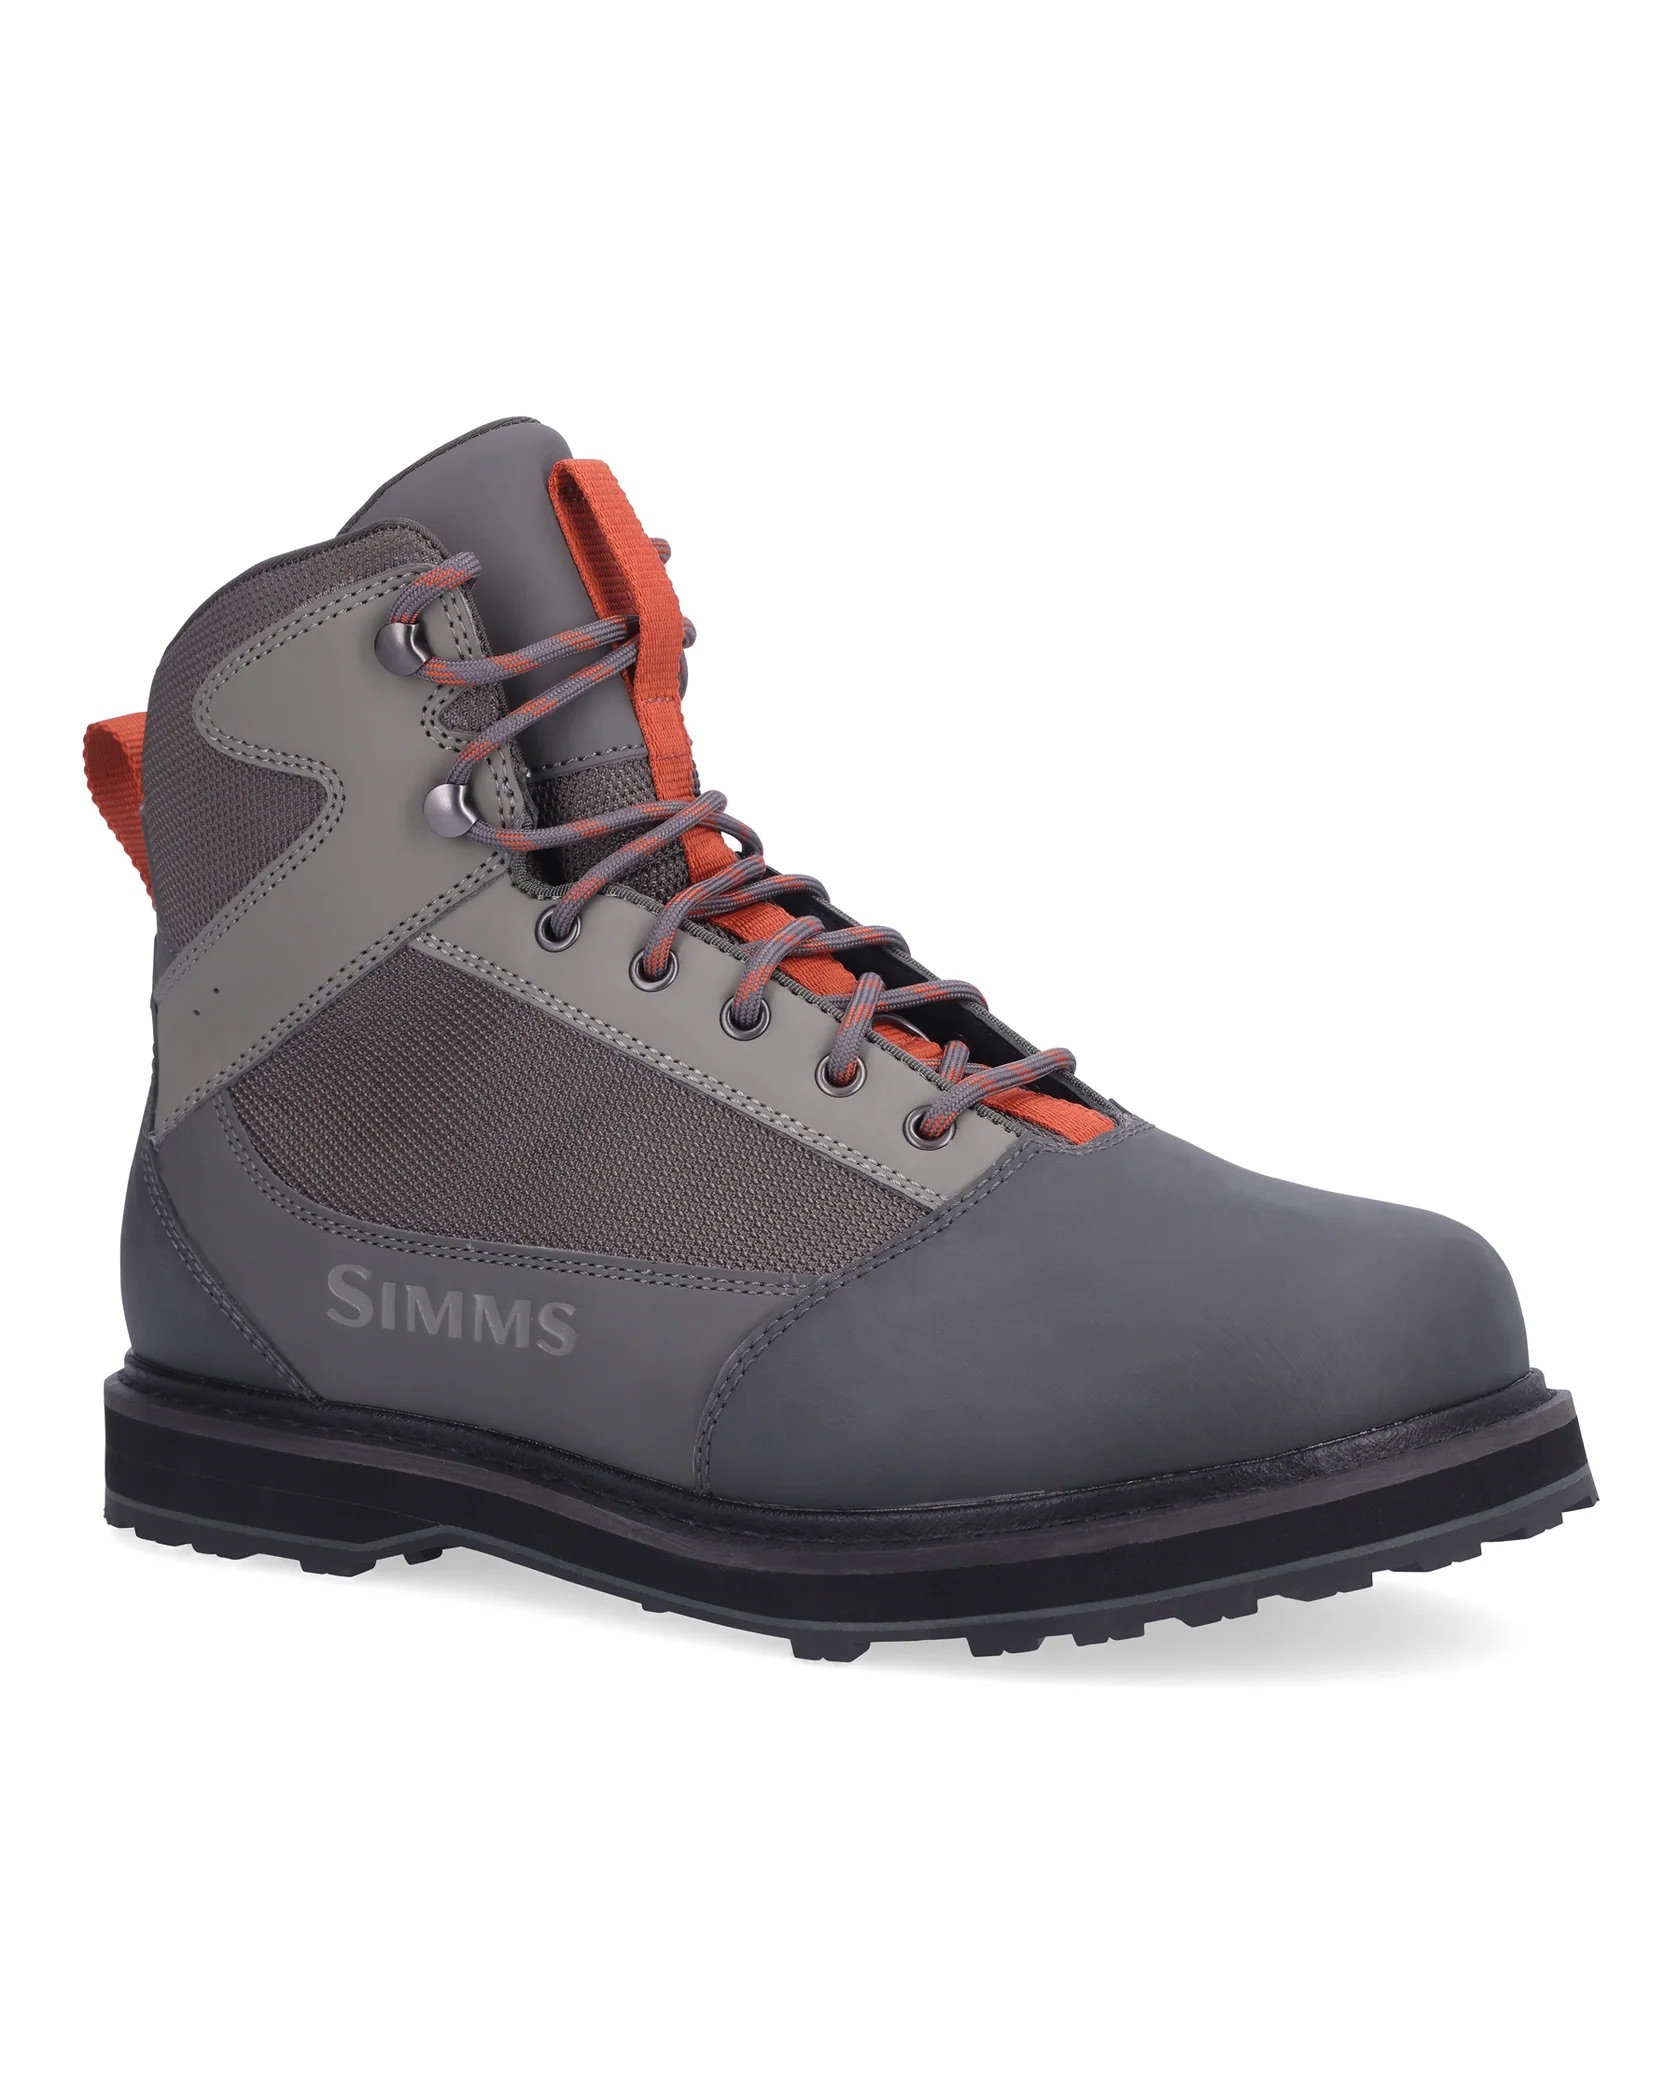 Simms Tributary Wading Boot - Rubber - Size 13